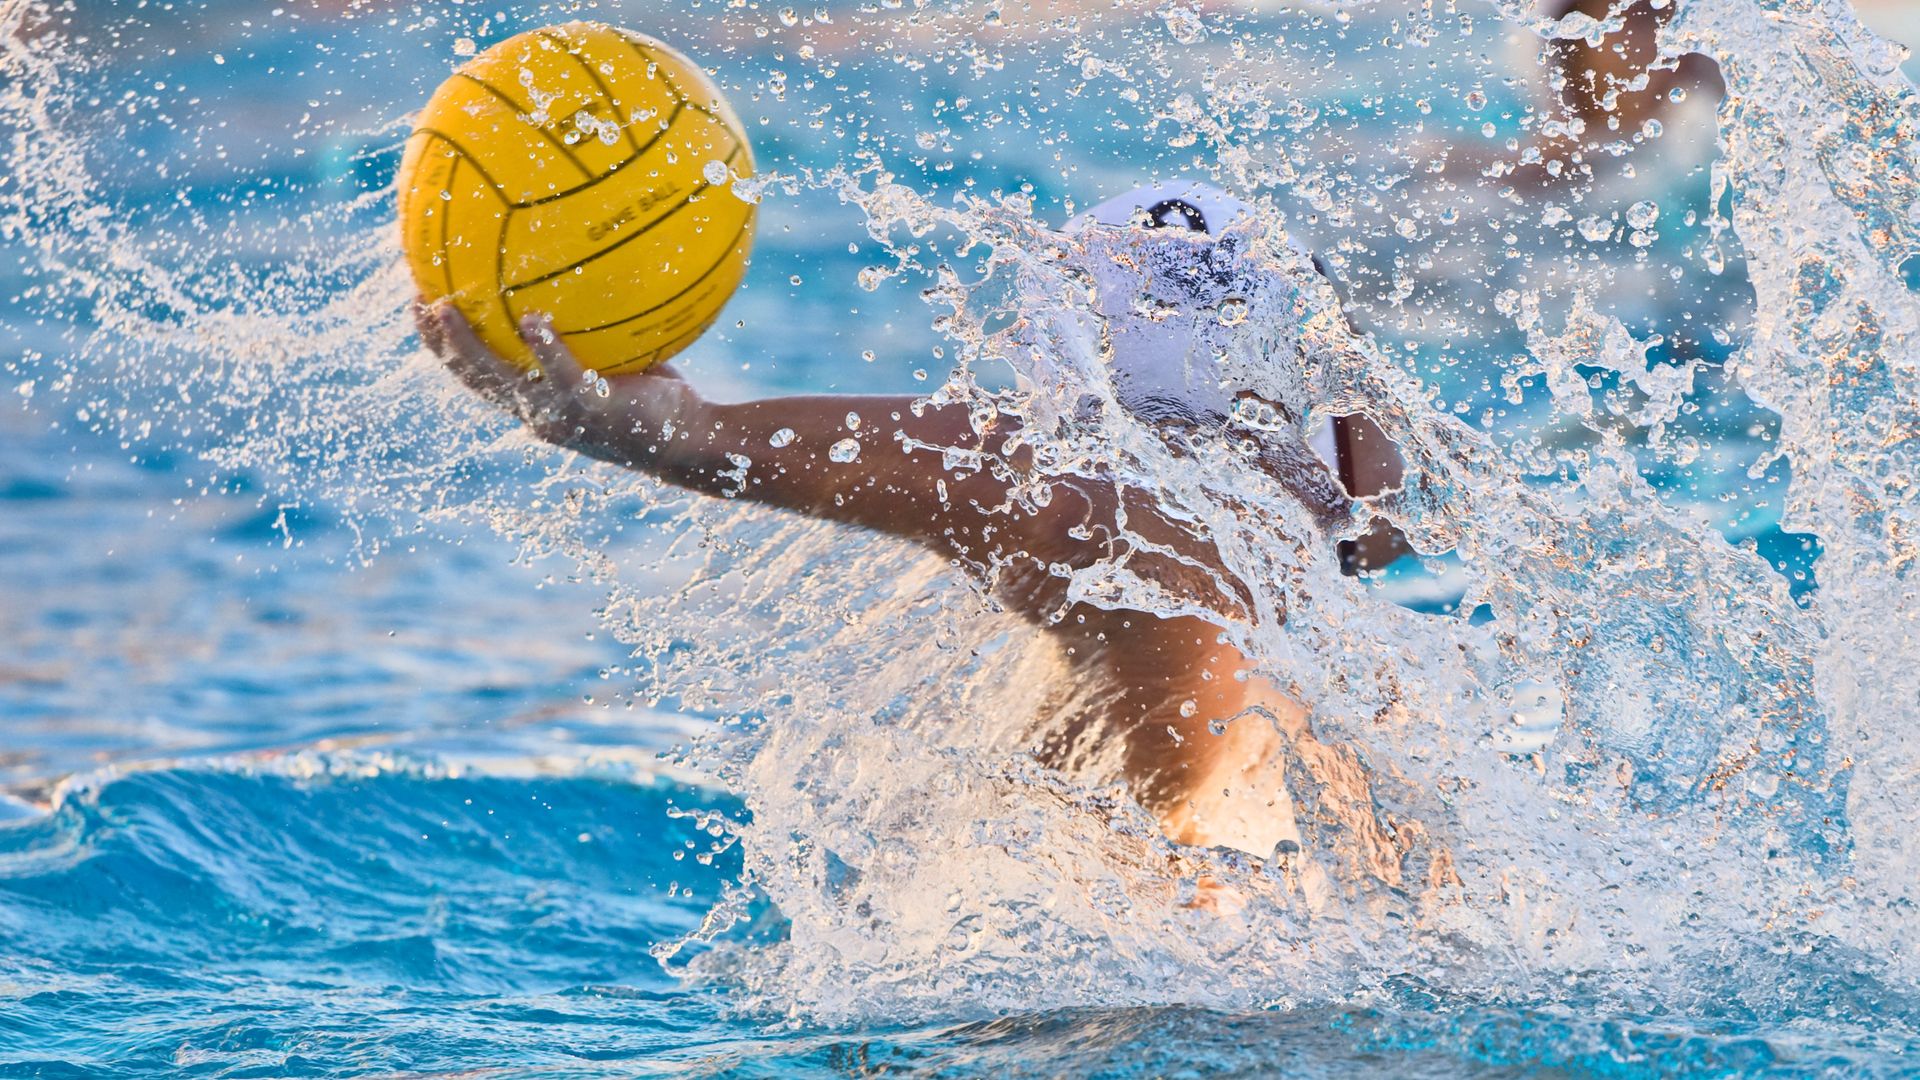 How to watch Water Polo at Olympics 2020 key dates, live stream and